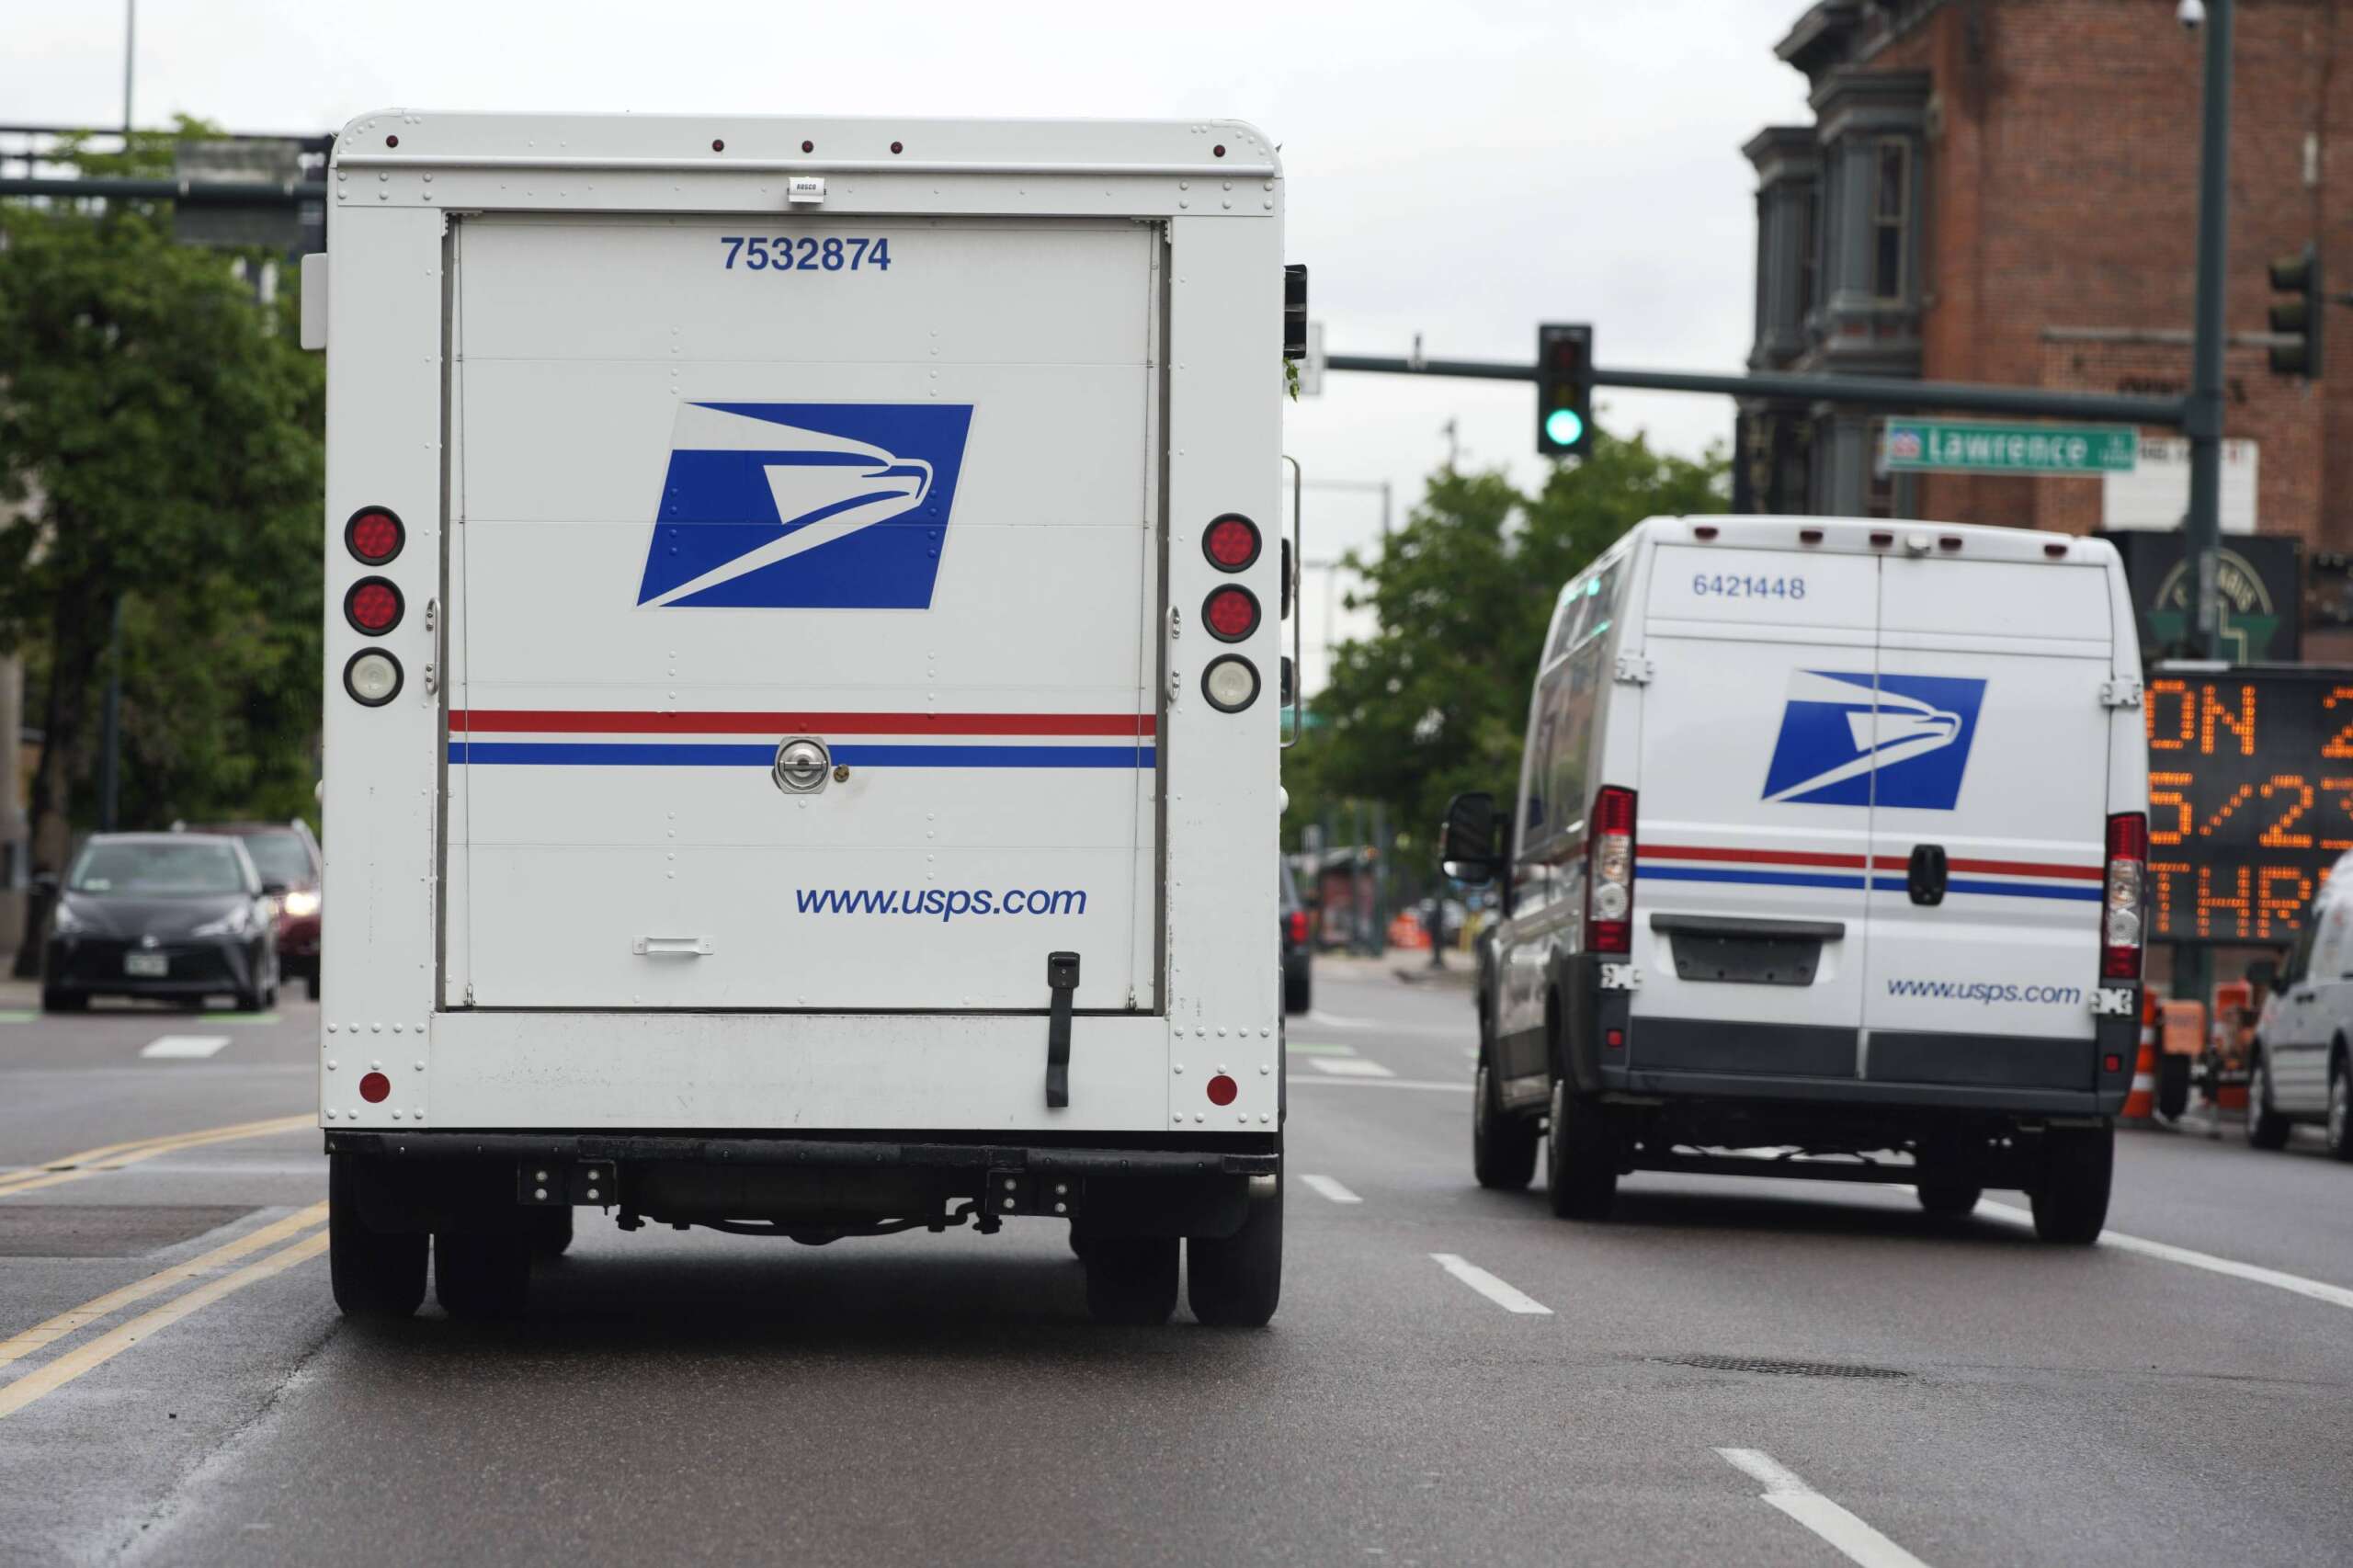 USPS eyes expansion of a potentially major insourcing initiative